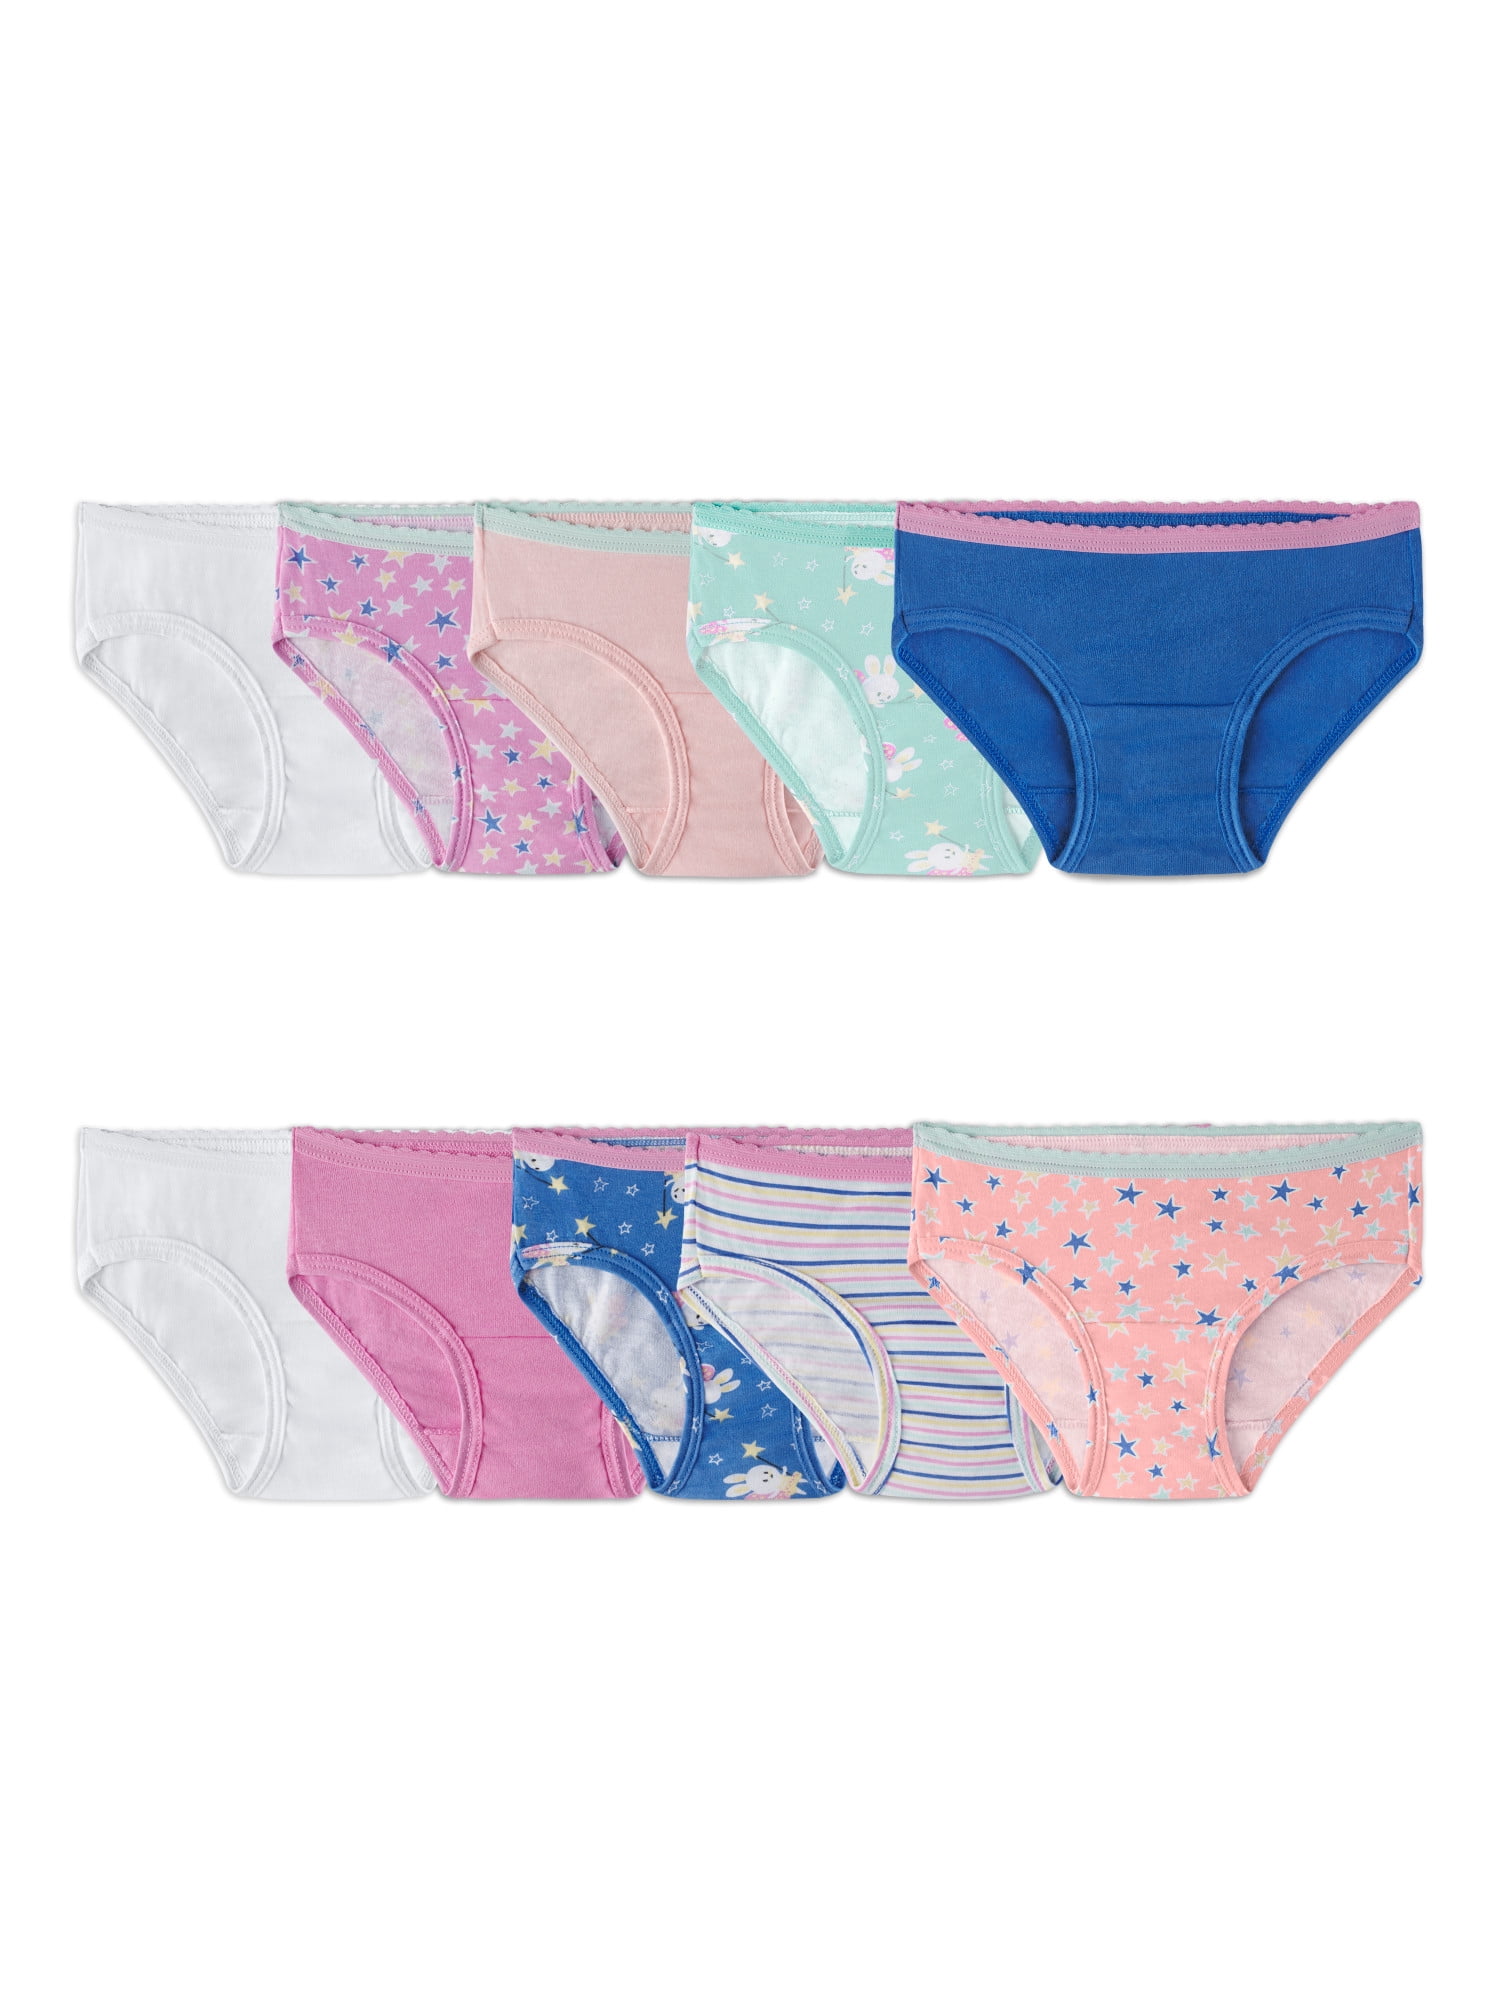 Fruit of the Loom Toddler Girl EverSoft Cotton Hipster Underwear, 10 Pack 